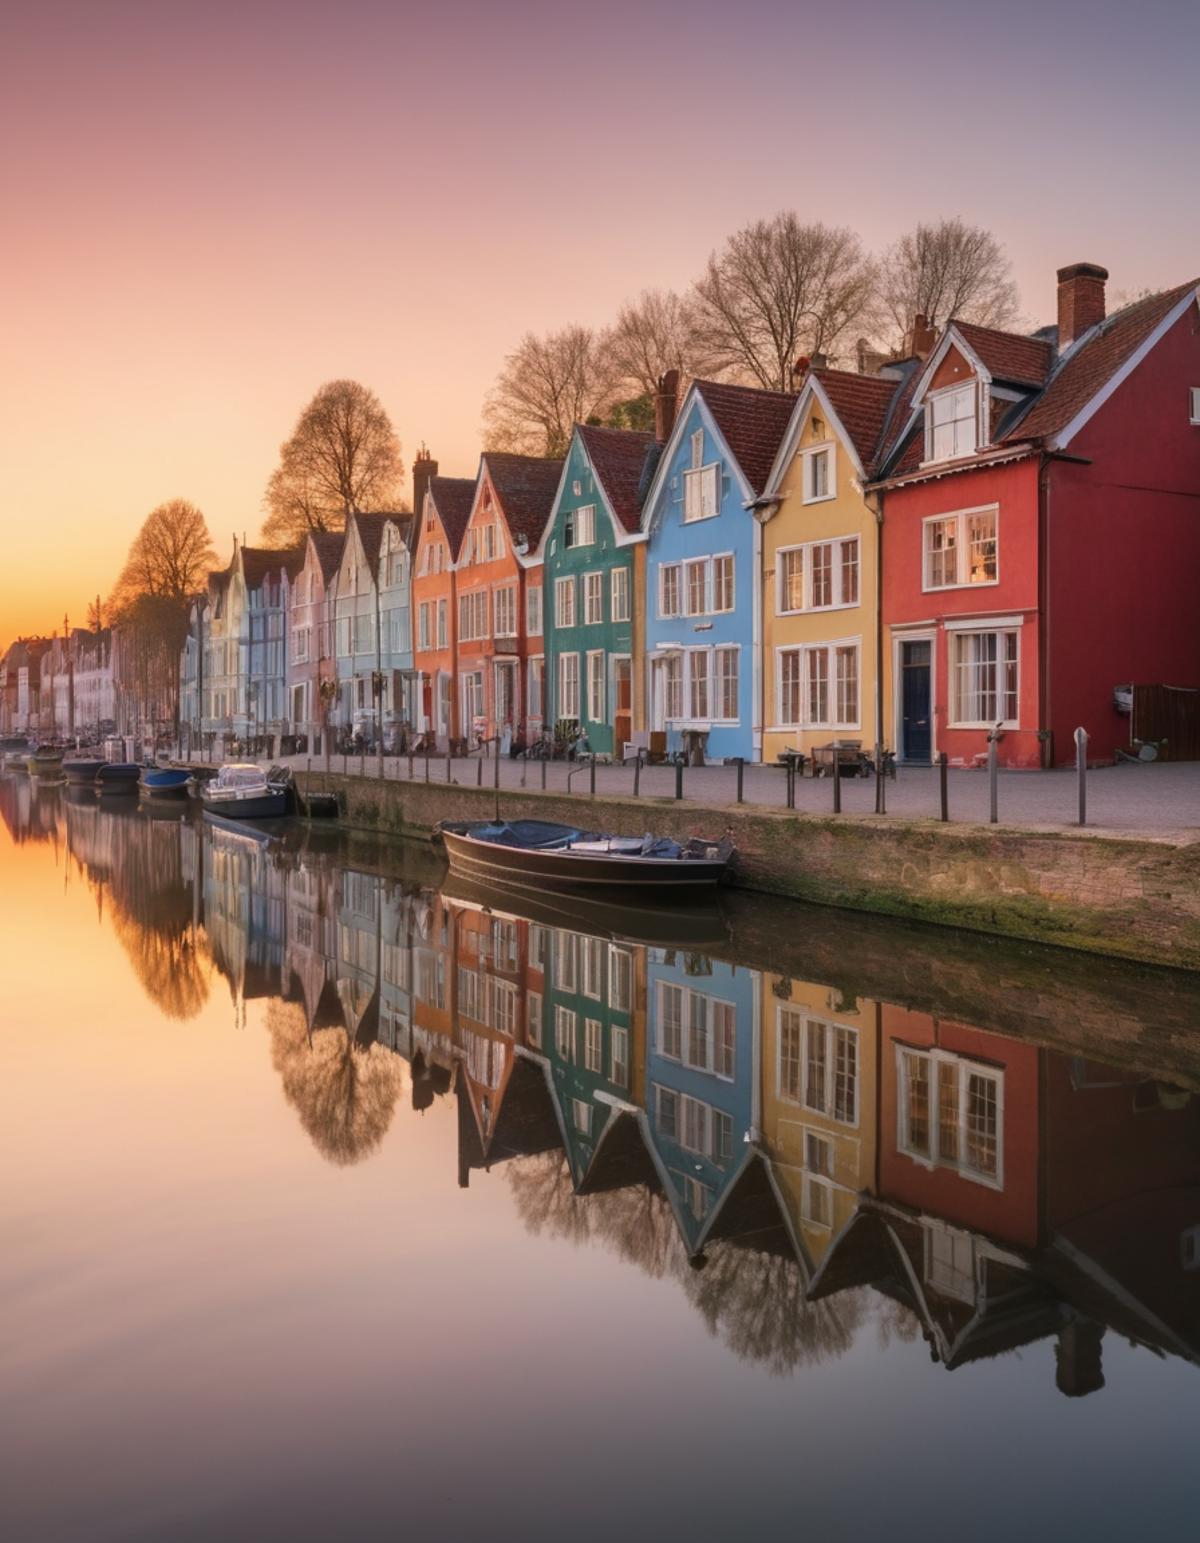 A row of colorful houses with a body of water in front.